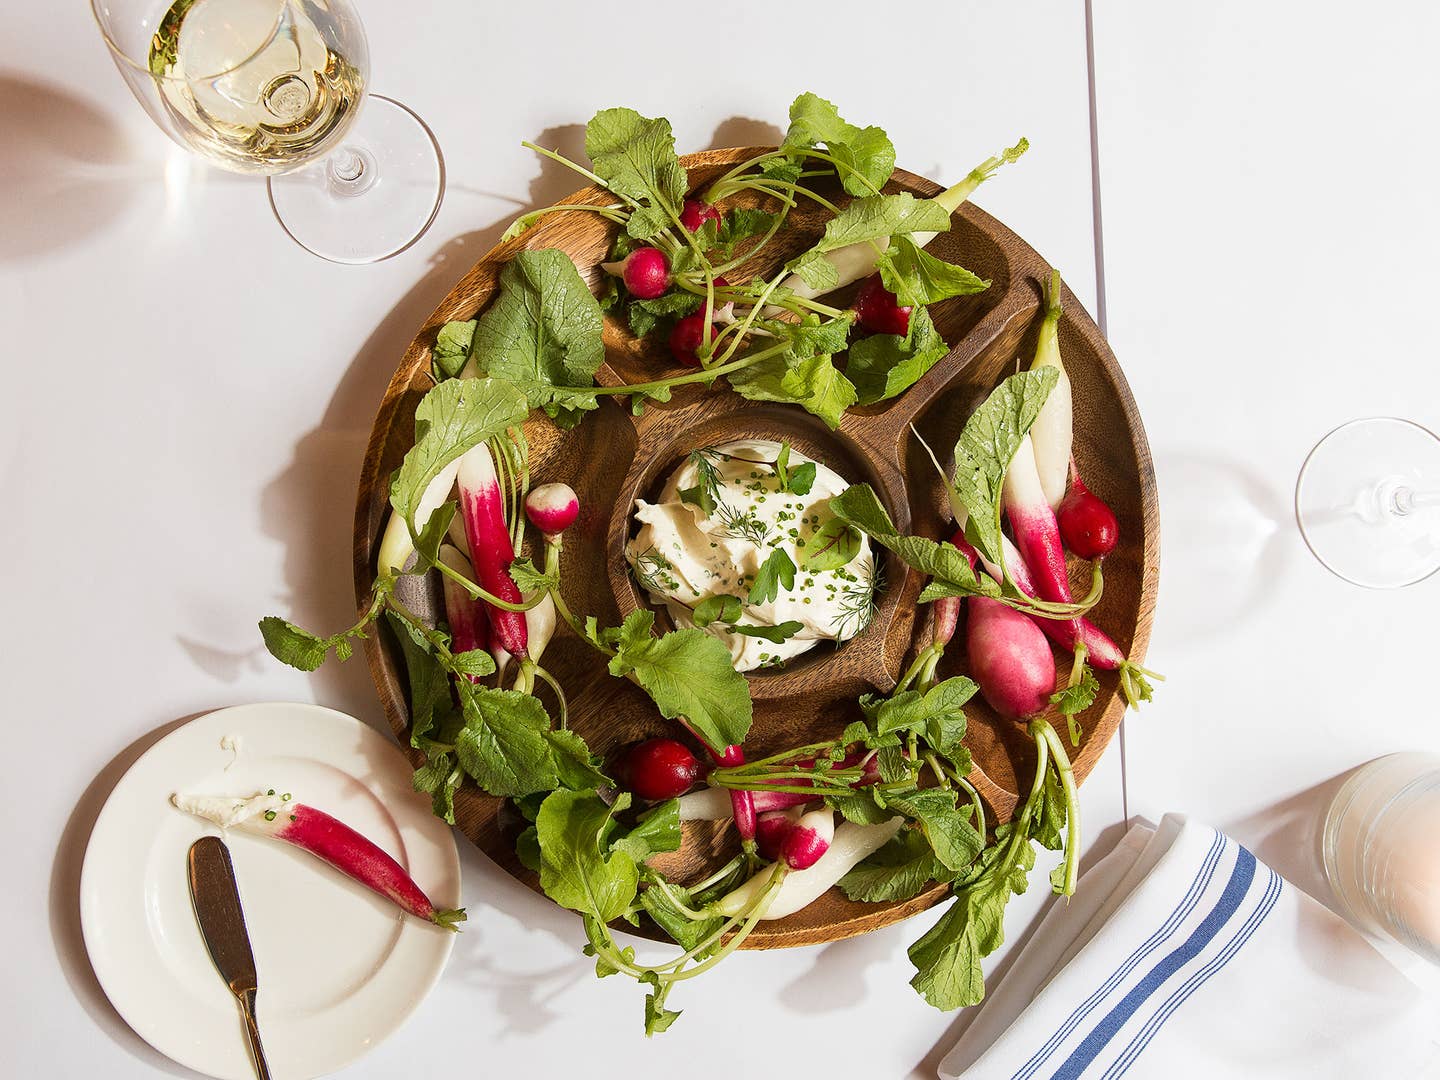 Boursin Dip with Radishes